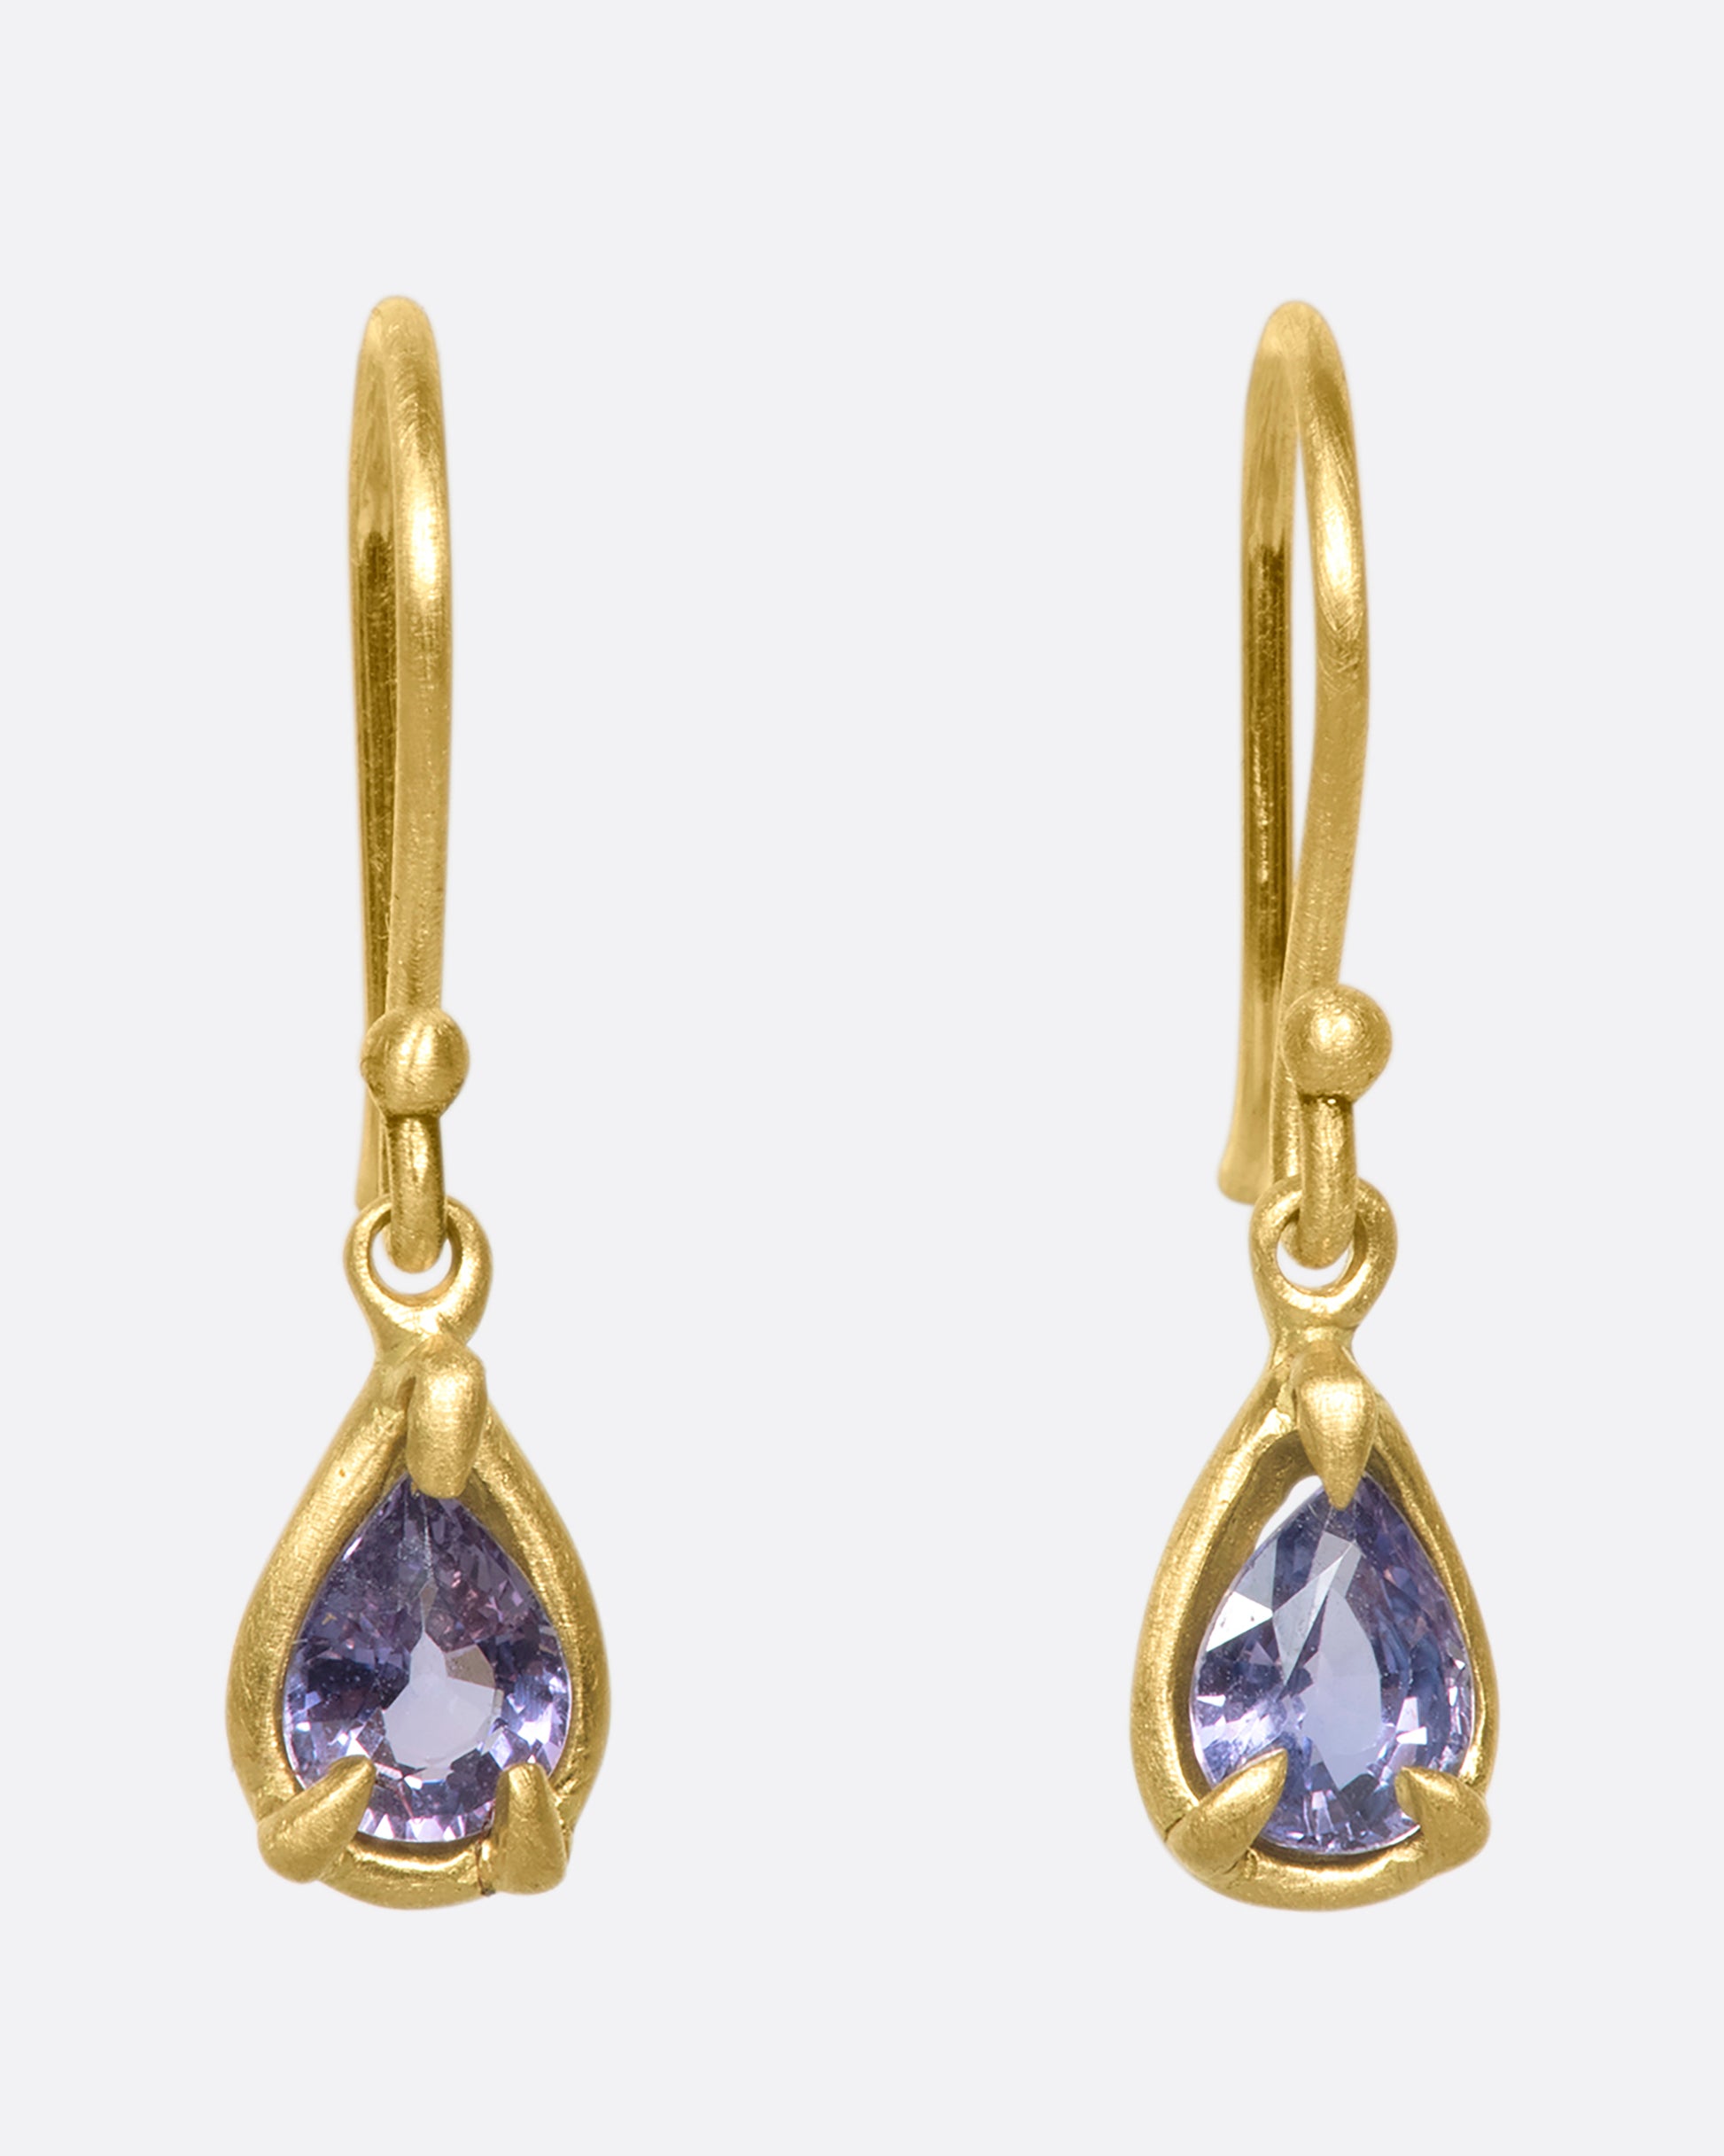 One-of-a-kind purple sapphire drops in an 18k gold pronged bezel setting